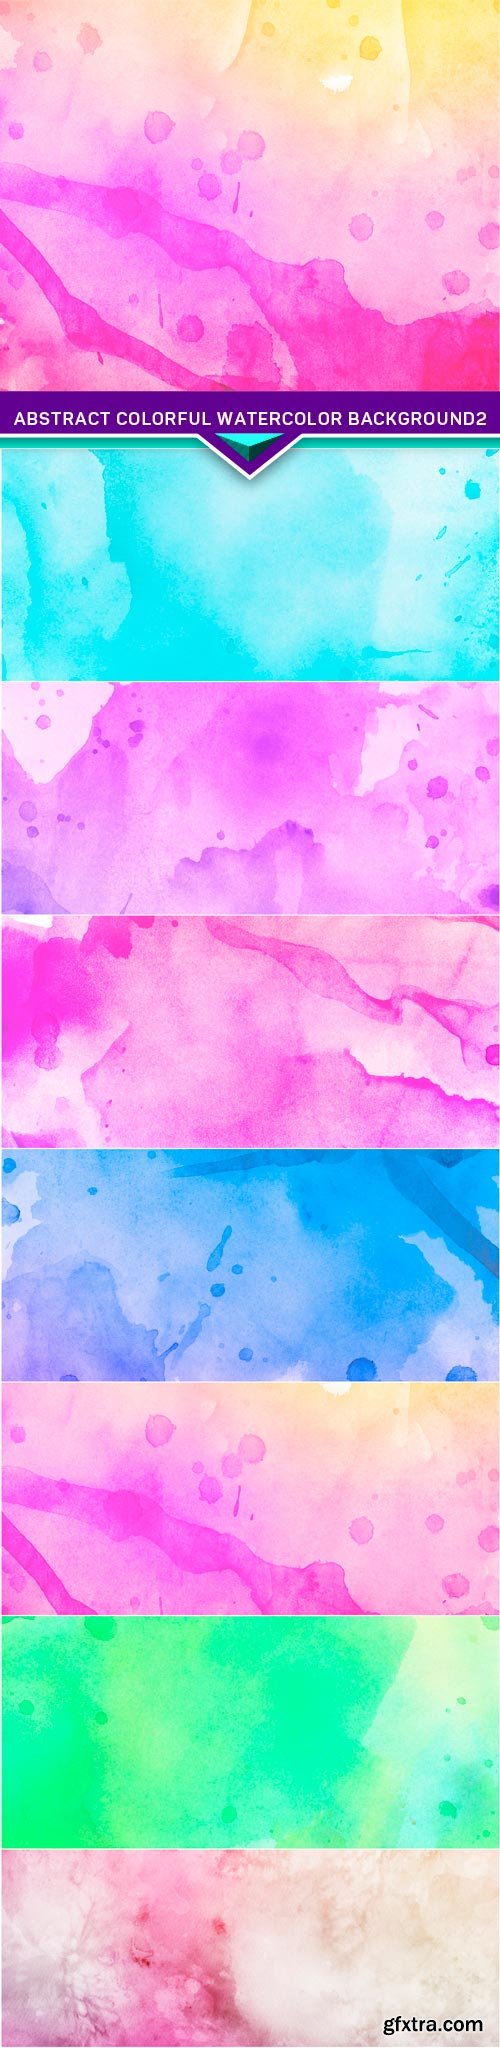 Abstract colorful watercolor background 2 7x JPEG